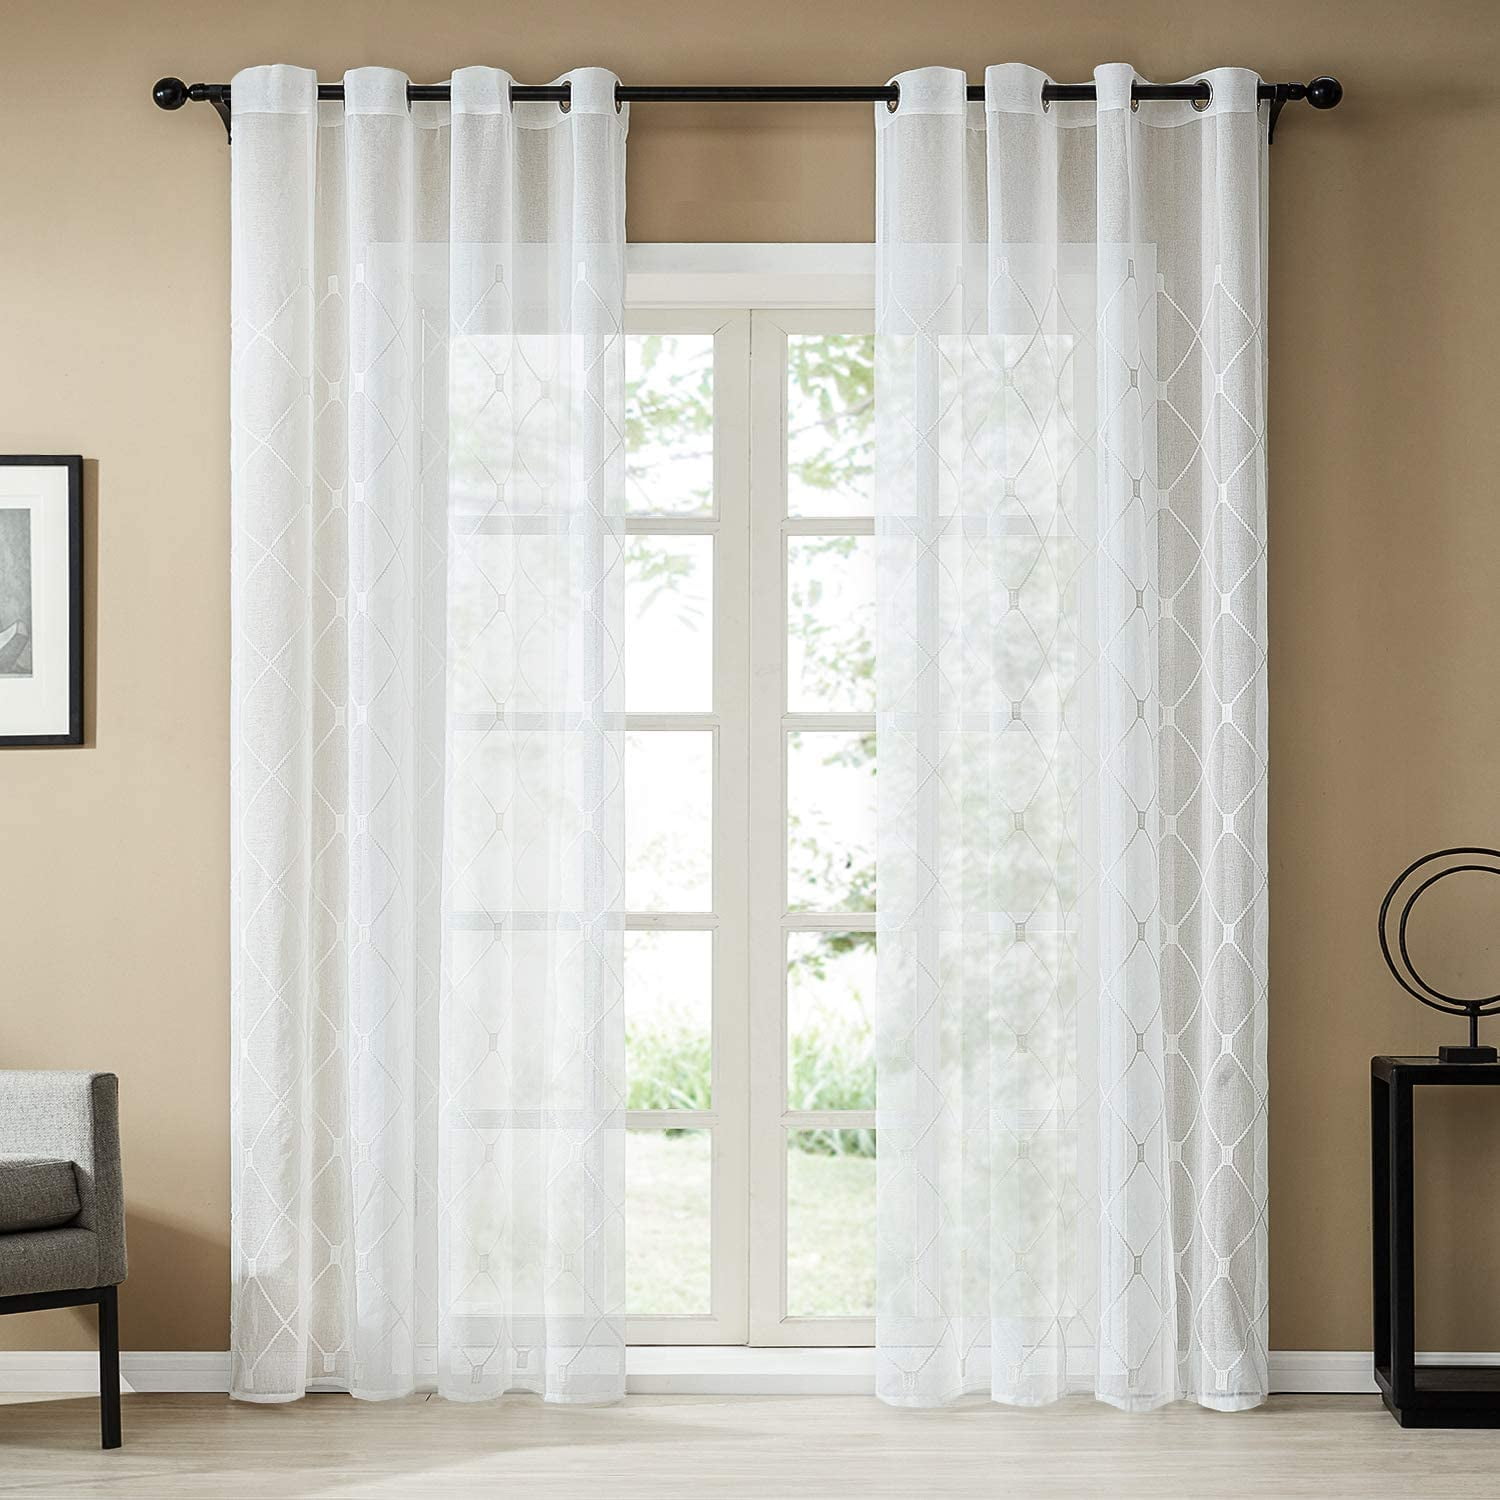 Topfinel White Sheer Curtains 90 Inches Long Embroidered Diamond